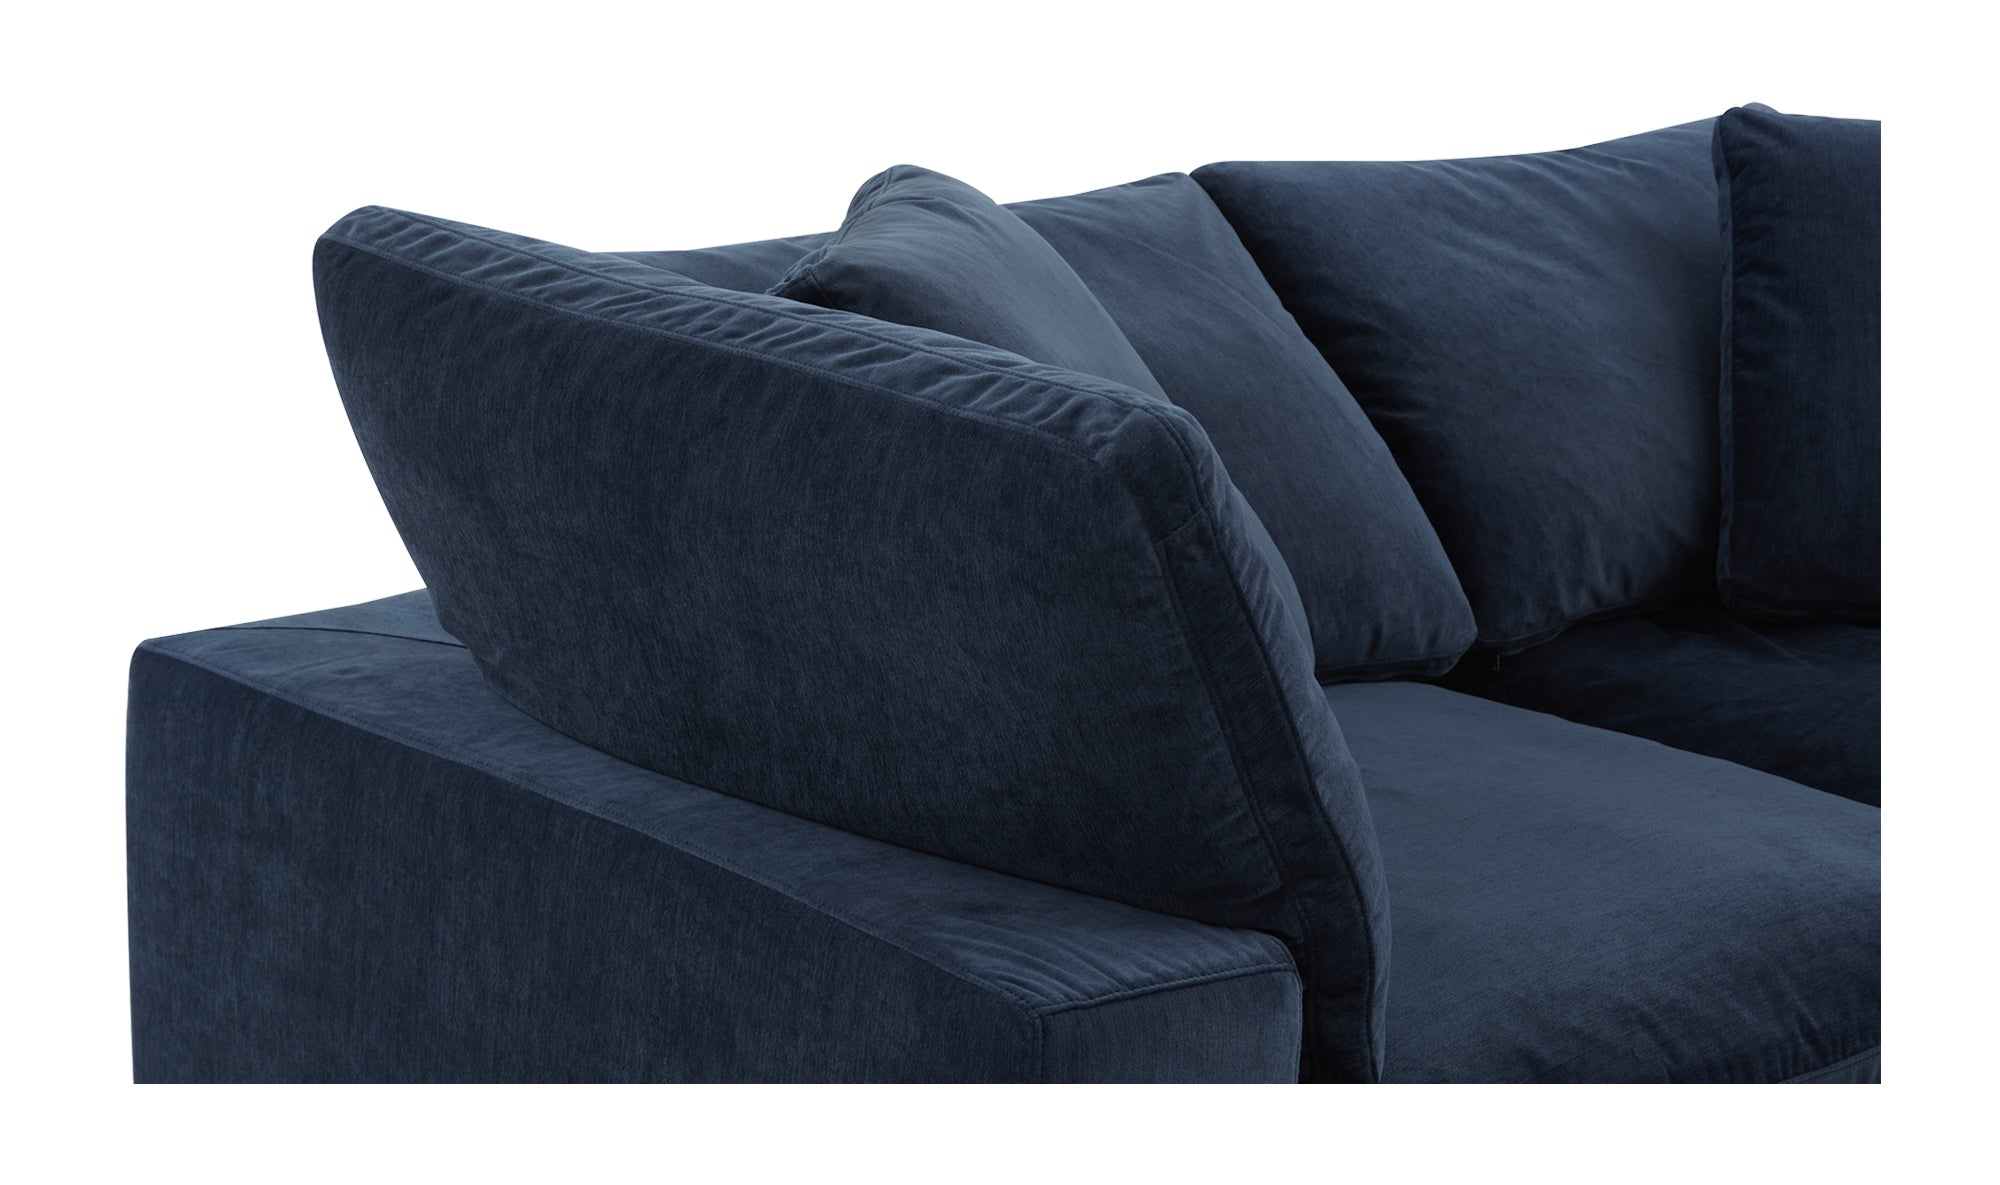 Clay Lounge Modular Sectional Performance Fabric - Nocturnal Sky